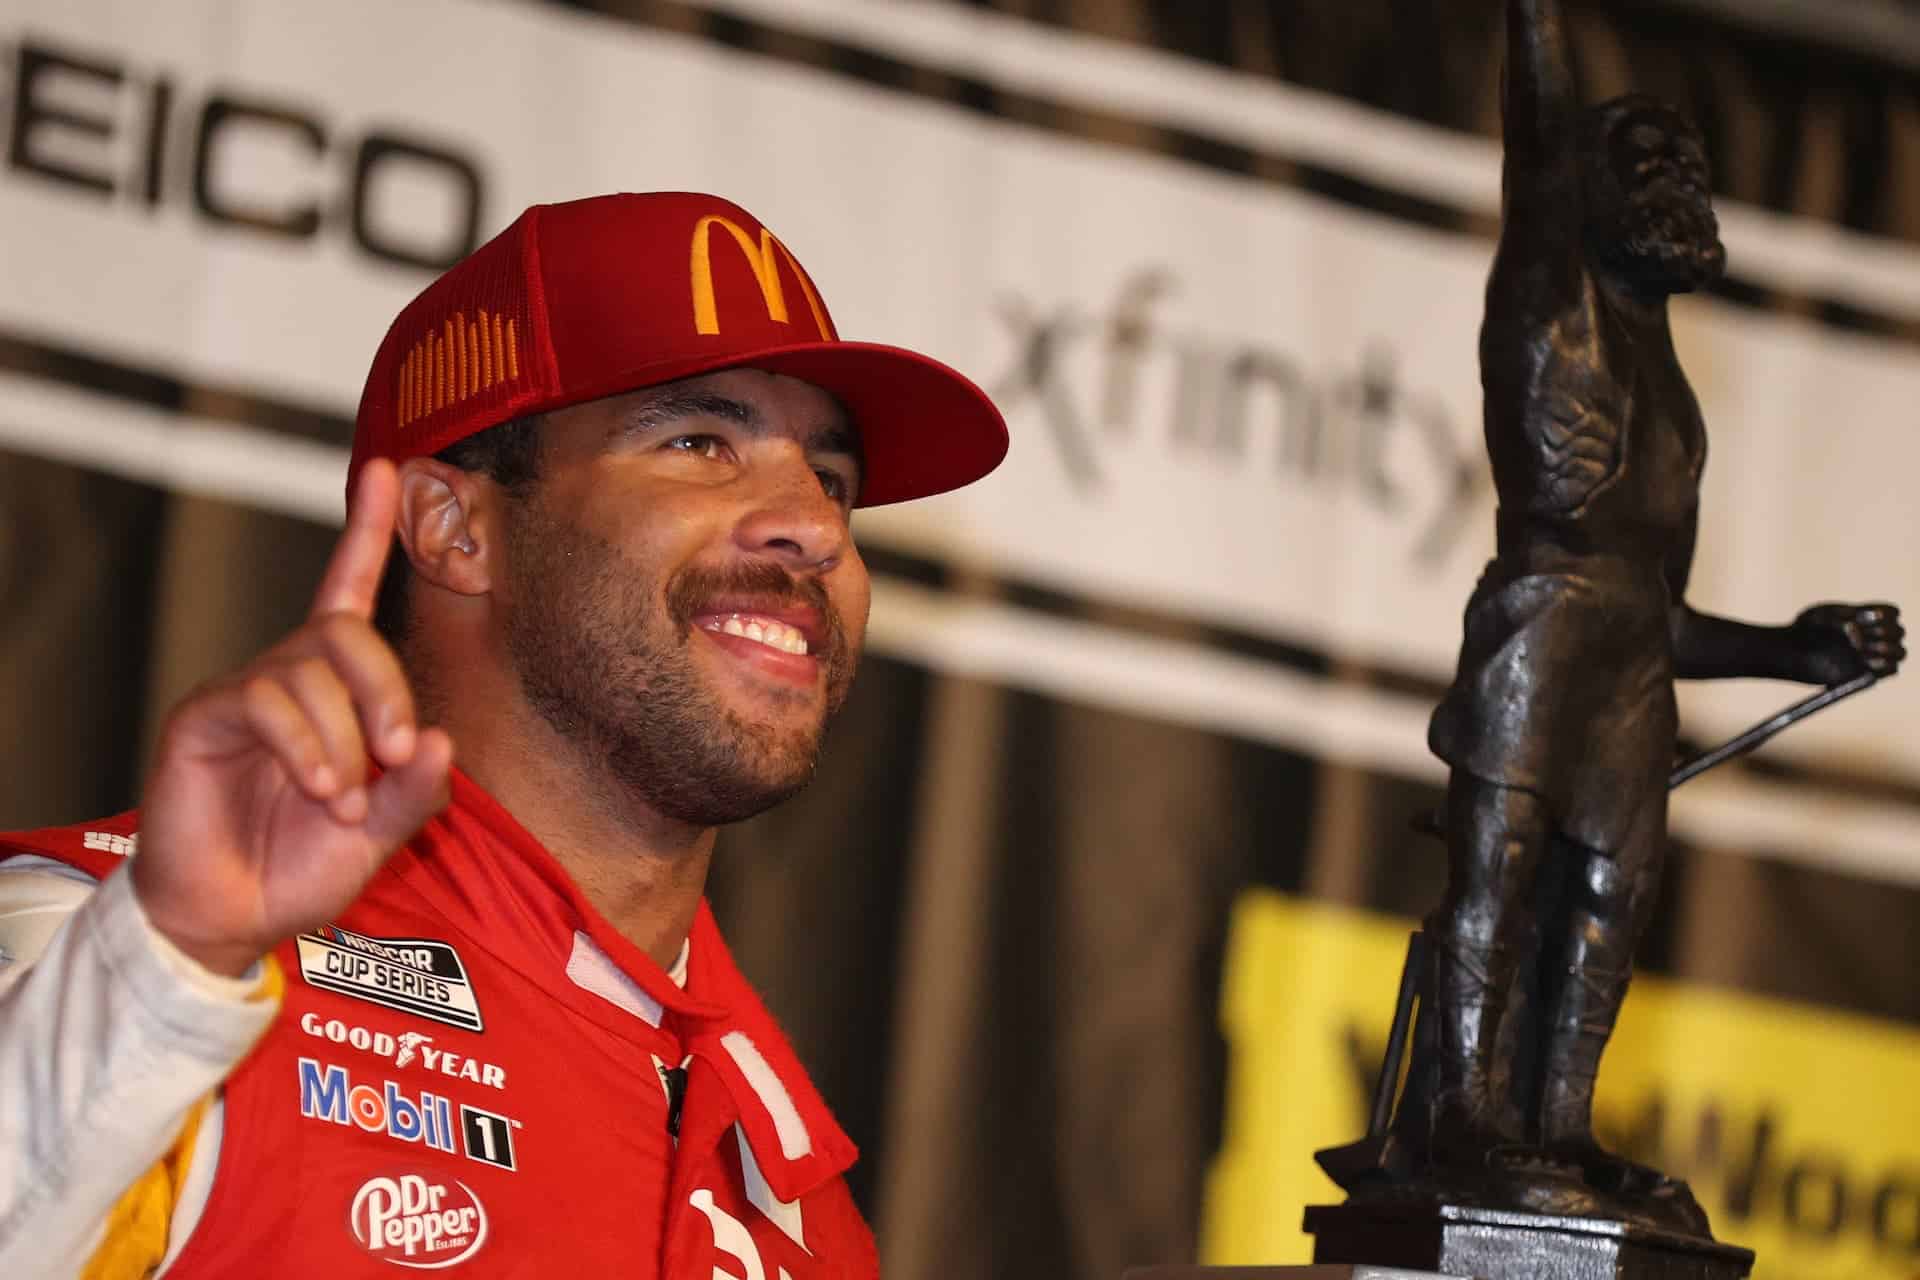 Credit: TALLADEGA, ALABAMA - OCTOBER 04: Bubba Wallace, driver of the #23 McDonald's Toyota, celebrates in victory lane after winning the rain-shortened NASCAR Cup Series YellaWood 500 at Talladega Superspeedway on October 04, 2021 in Talladega, Alabama. (Photo by Chris Graythen/Getty Images)